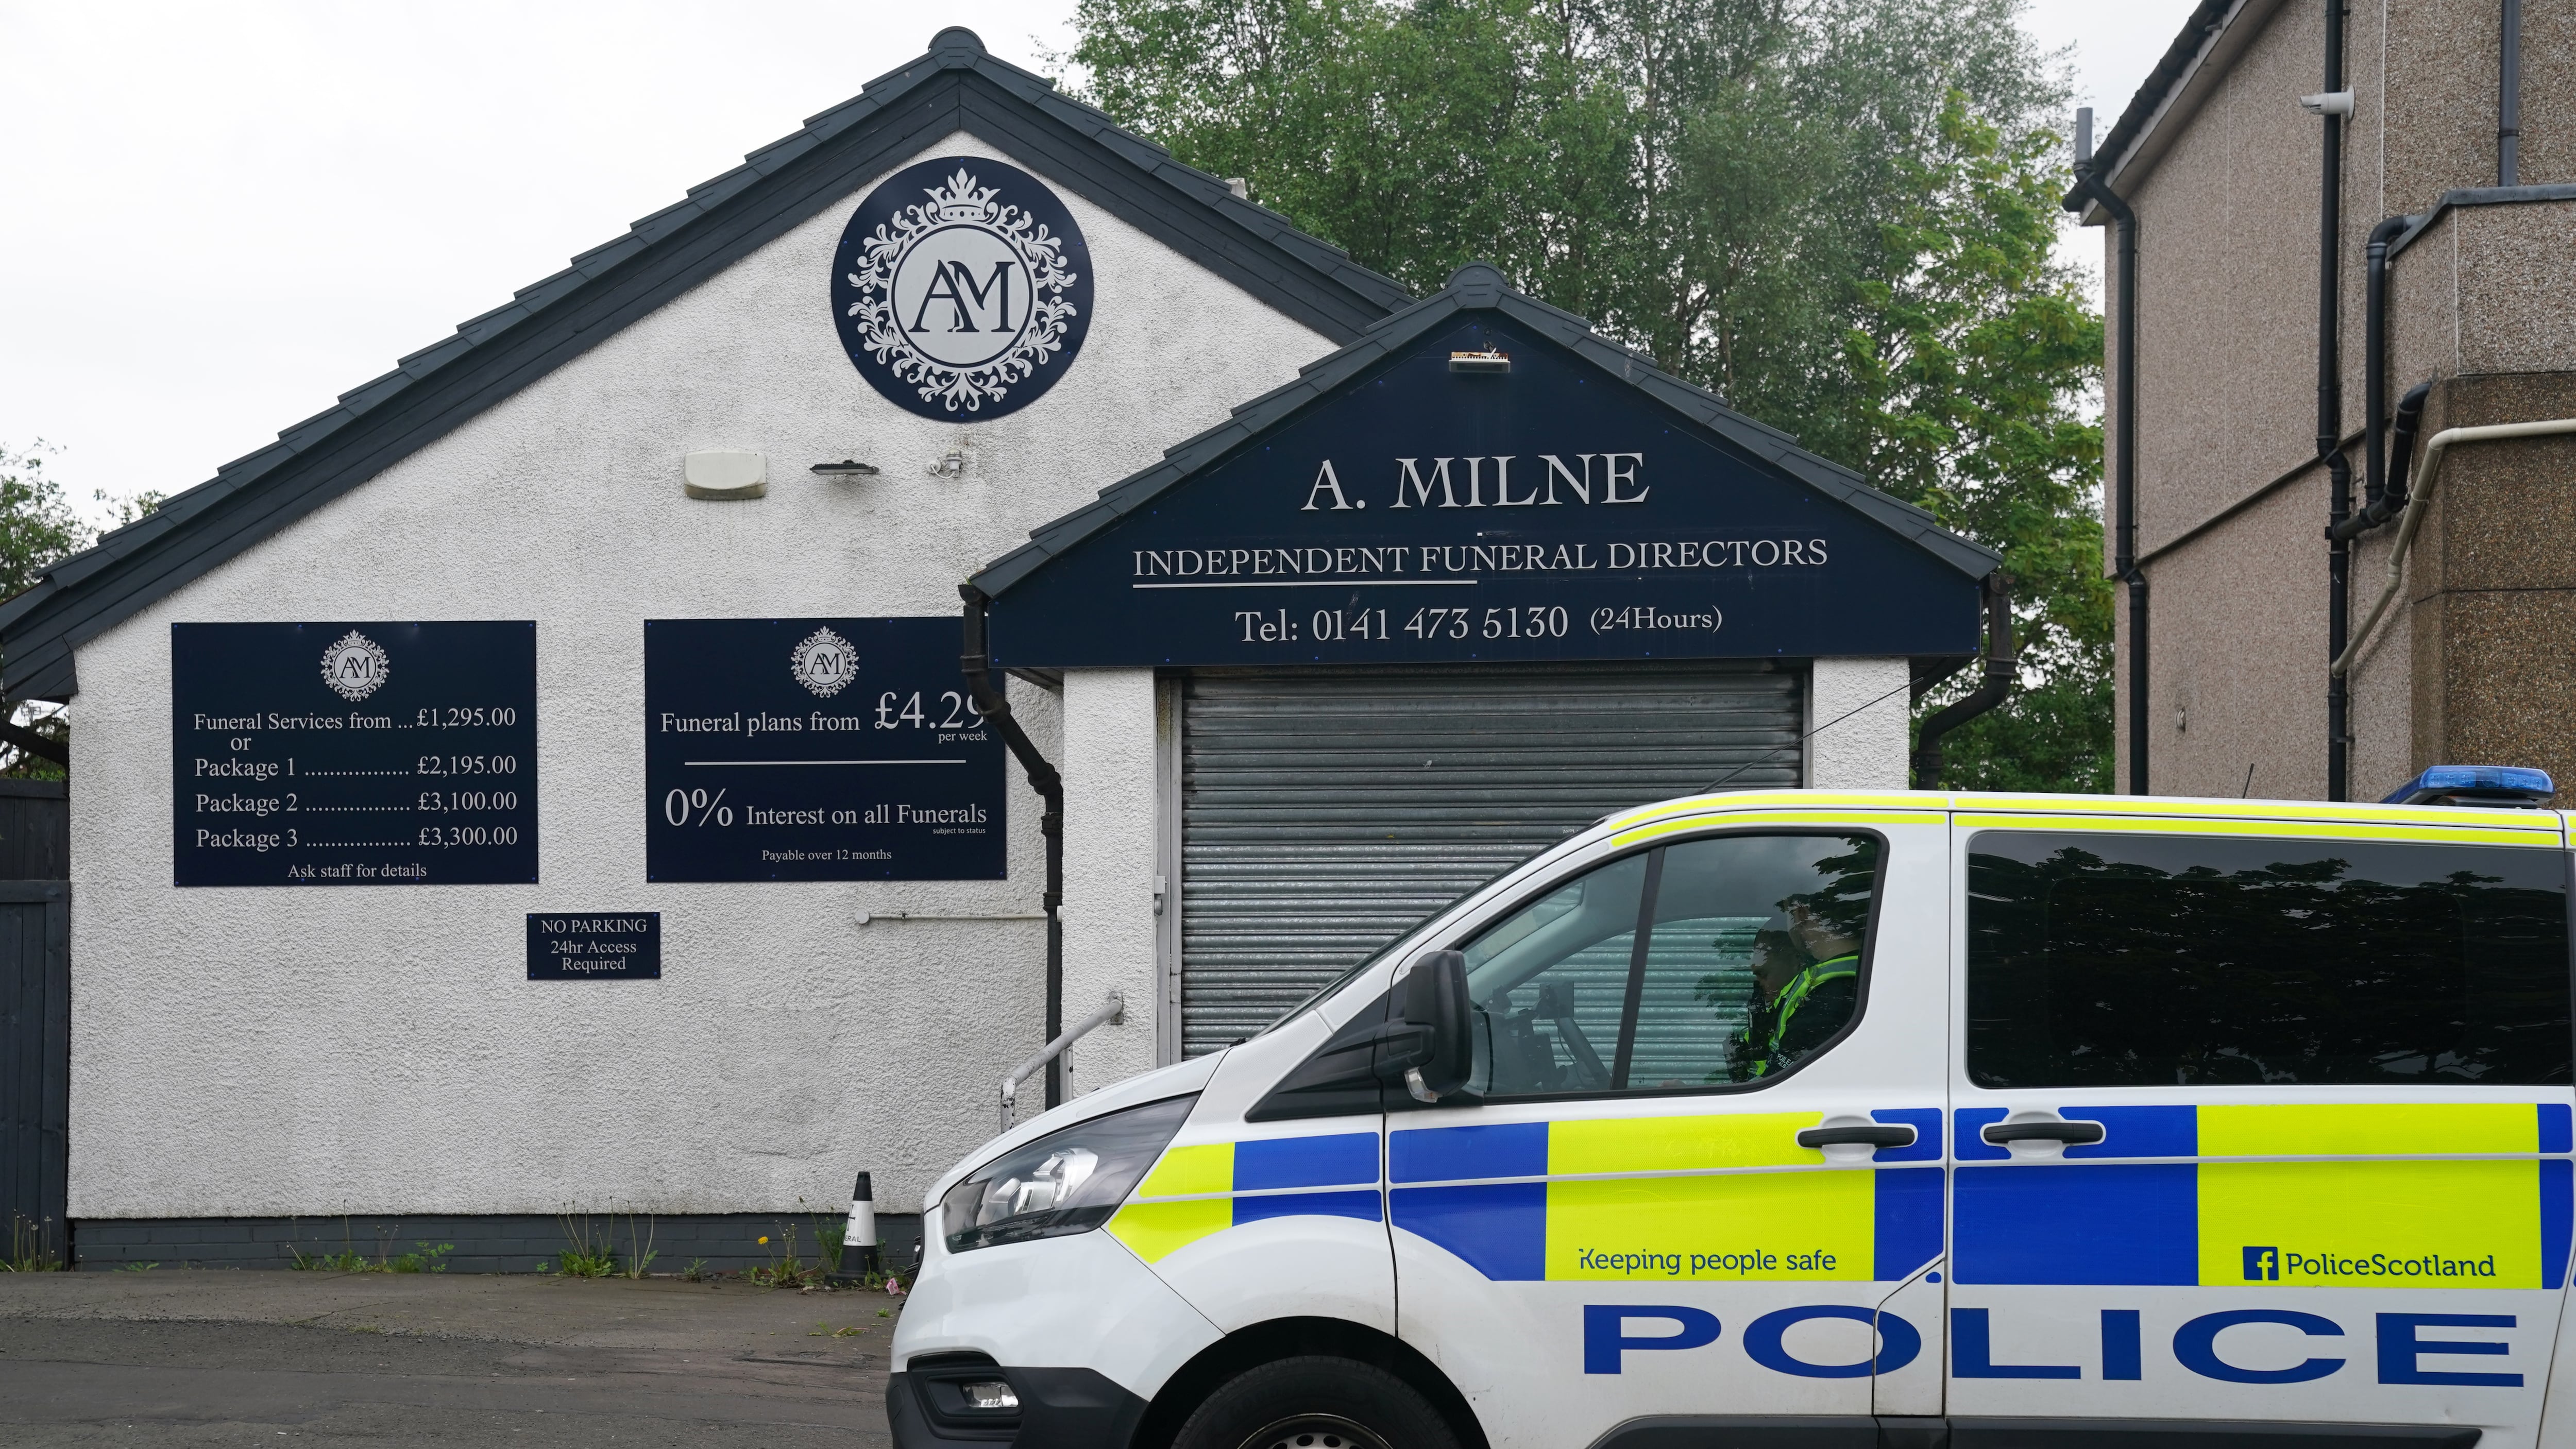 Family-run A Milne Funeral Directors is under police investigation